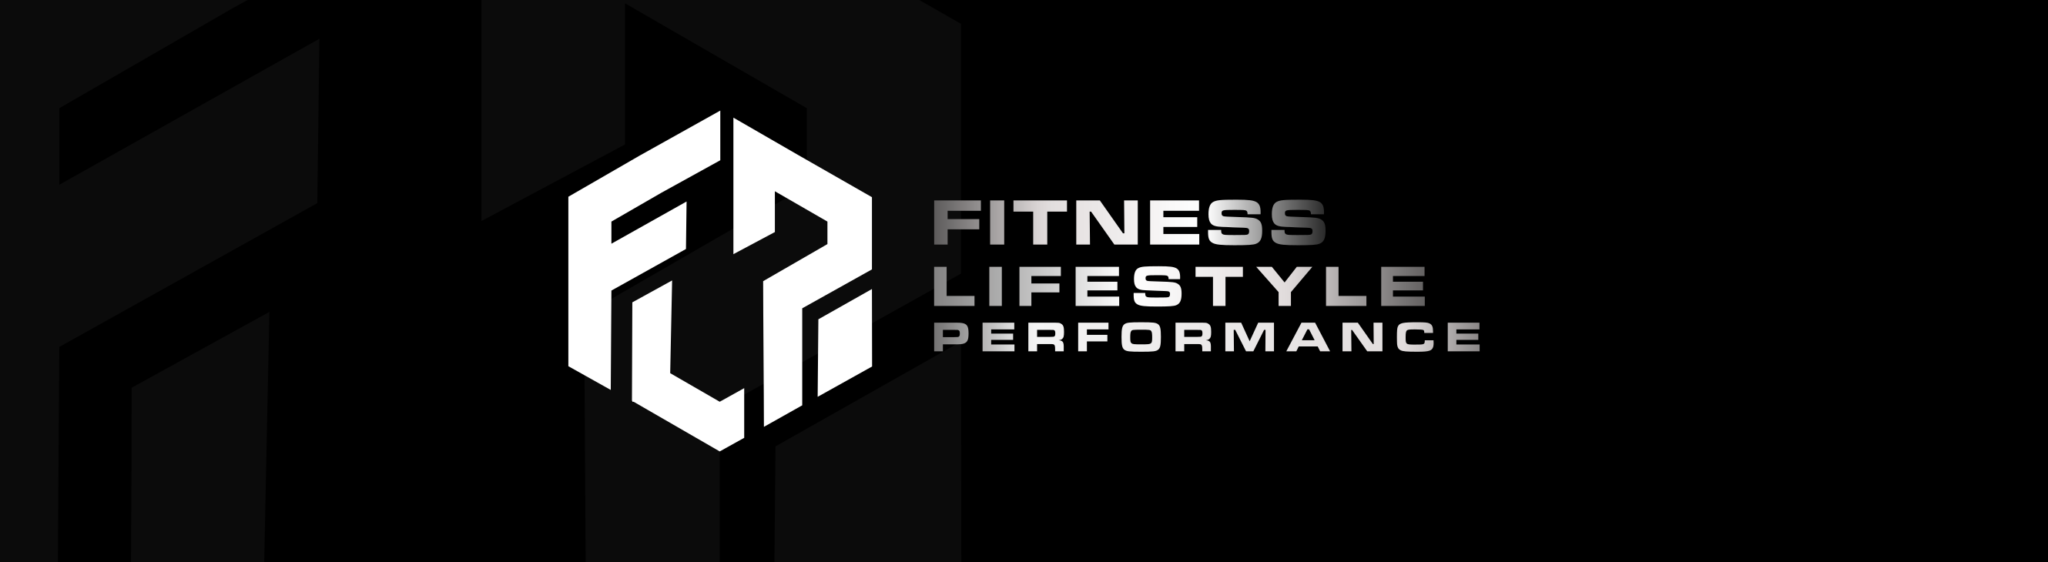 Home - Fitness Lifestyle Performance